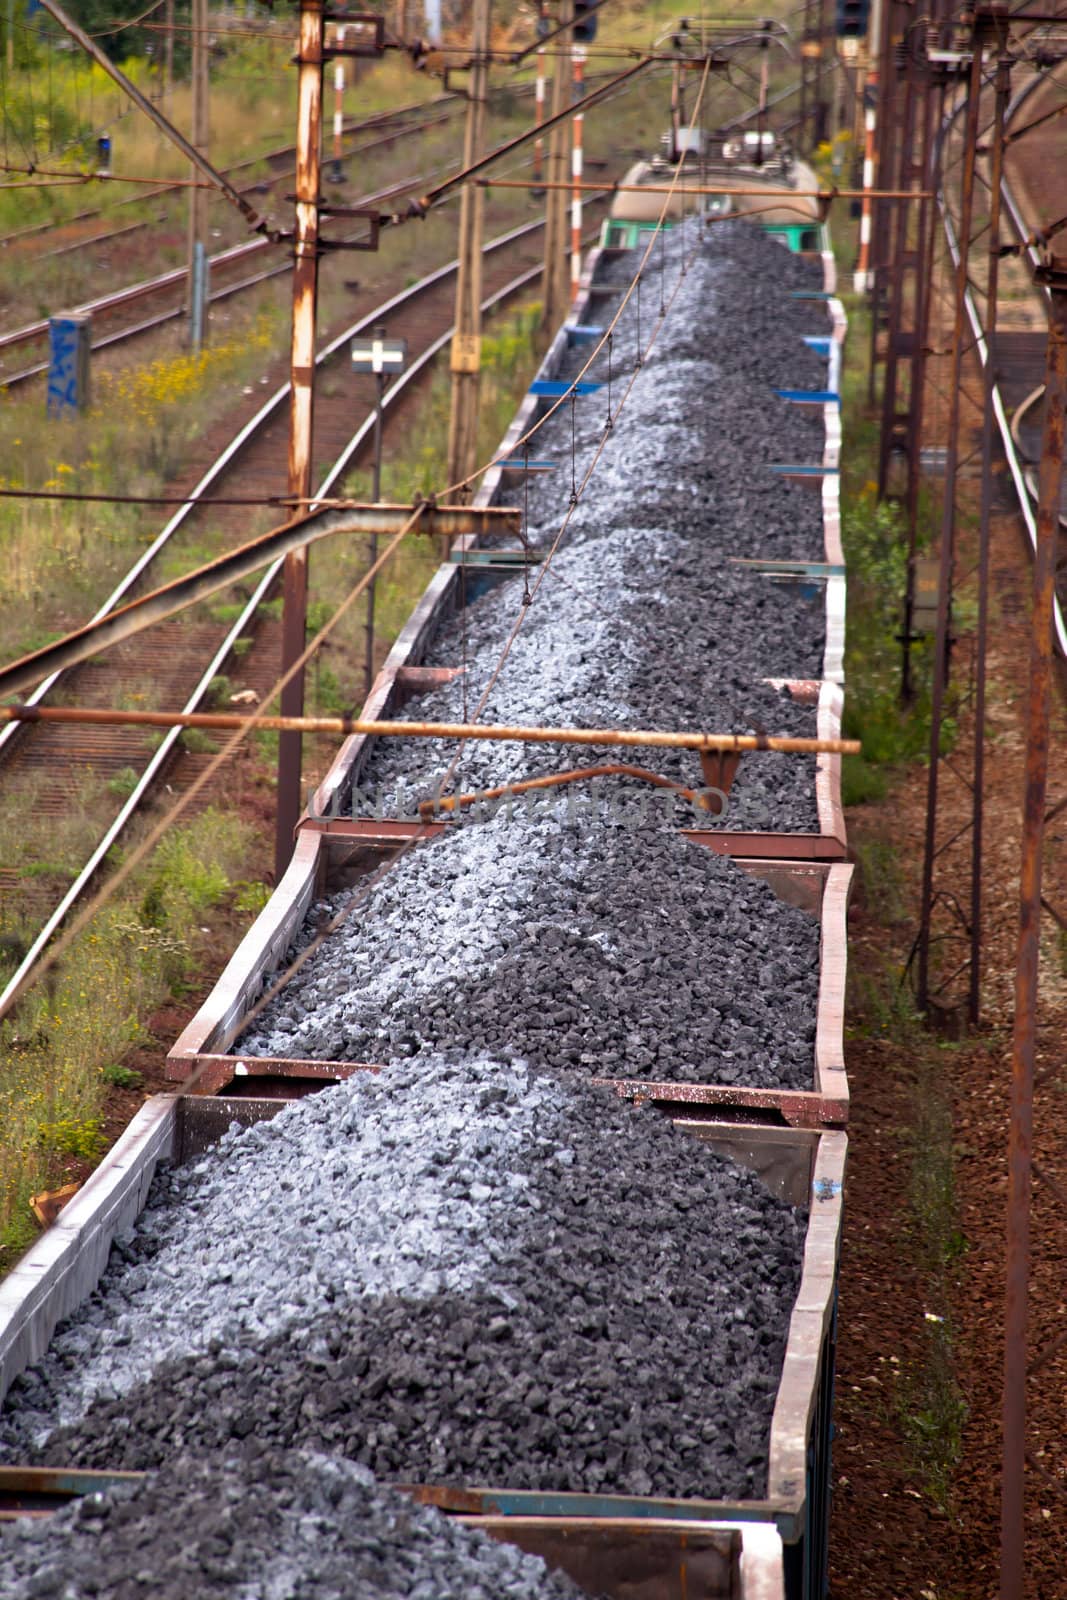 Coal train passing through the station
